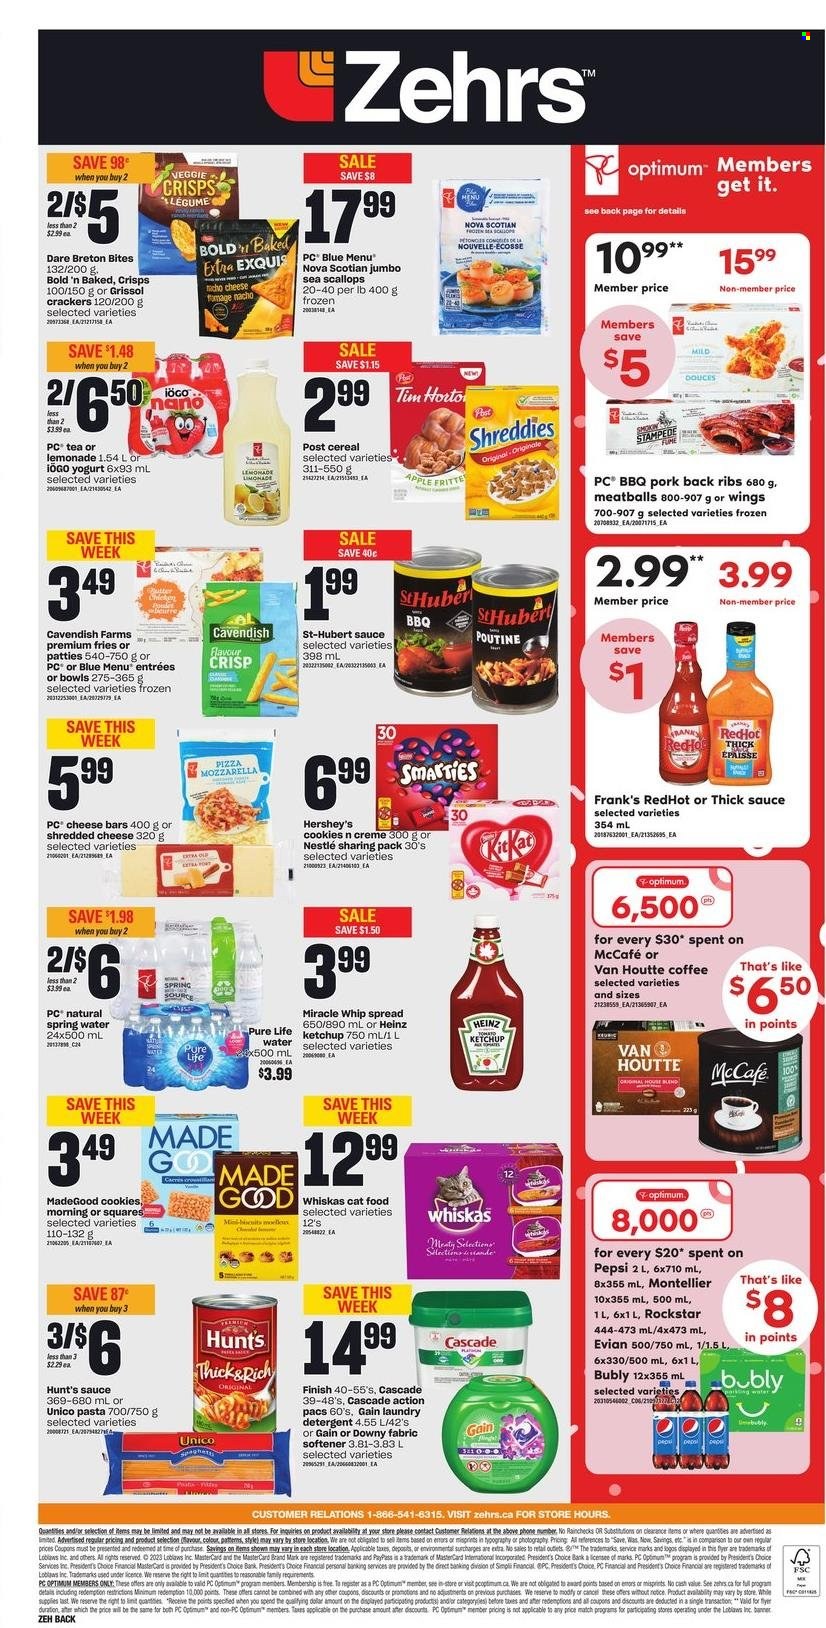 thumbnail - Zehrs Flyer - January 26, 2023 - February 01, 2023 - Sales products - Apple, scallops, spaghetti, pizza, meatballs, pasta, shredded cheese, yoghurt, Miracle Whip, Hershey's, potato fries, cookies, crackers, biscuit, cereals, lemonade, Pepsi, Rockstar, spring water, Evian, tea, coffee, McCafe, ribs, pork meat, pork ribs, pork back ribs, Gain, fabric softener, laundry detergent, Cascade, Downy Laundry, plate, animal food, cat food, Optimum, detergent, Nestlé, Heinz, ketchup, Whiskas, Smarties. Page 2.